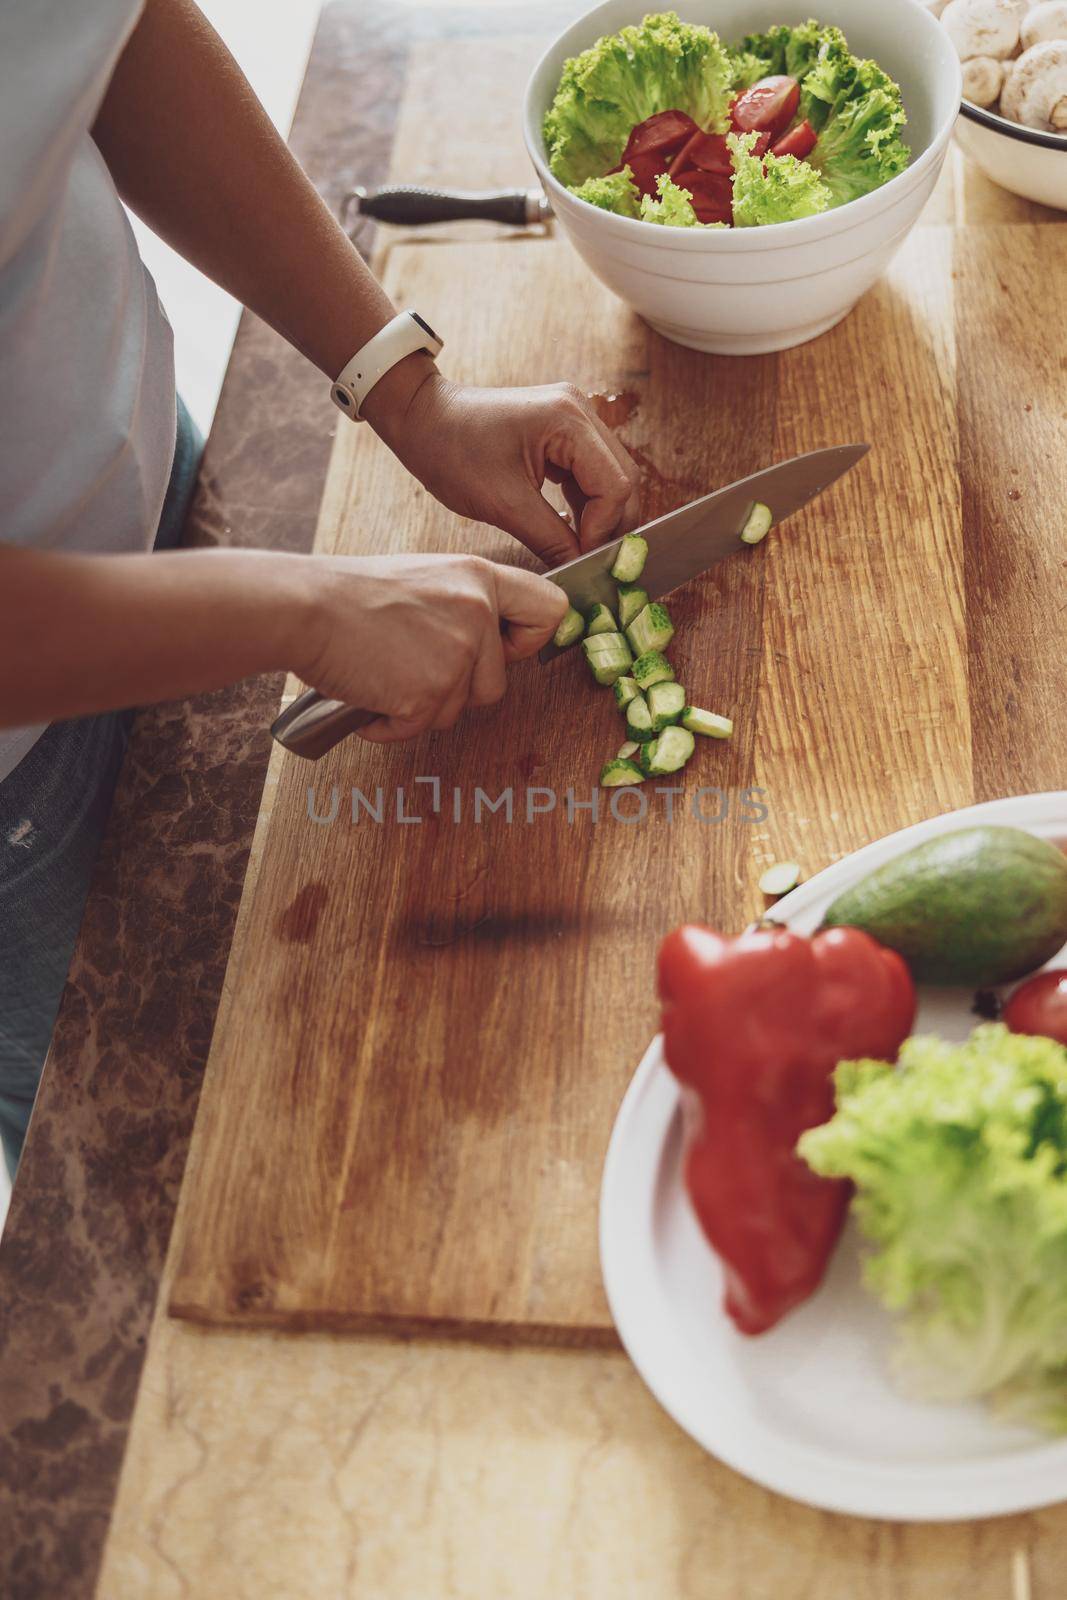 Chopping vegetables with a knife on a wooden kitchen board. Two bowls with vegetables and herbs